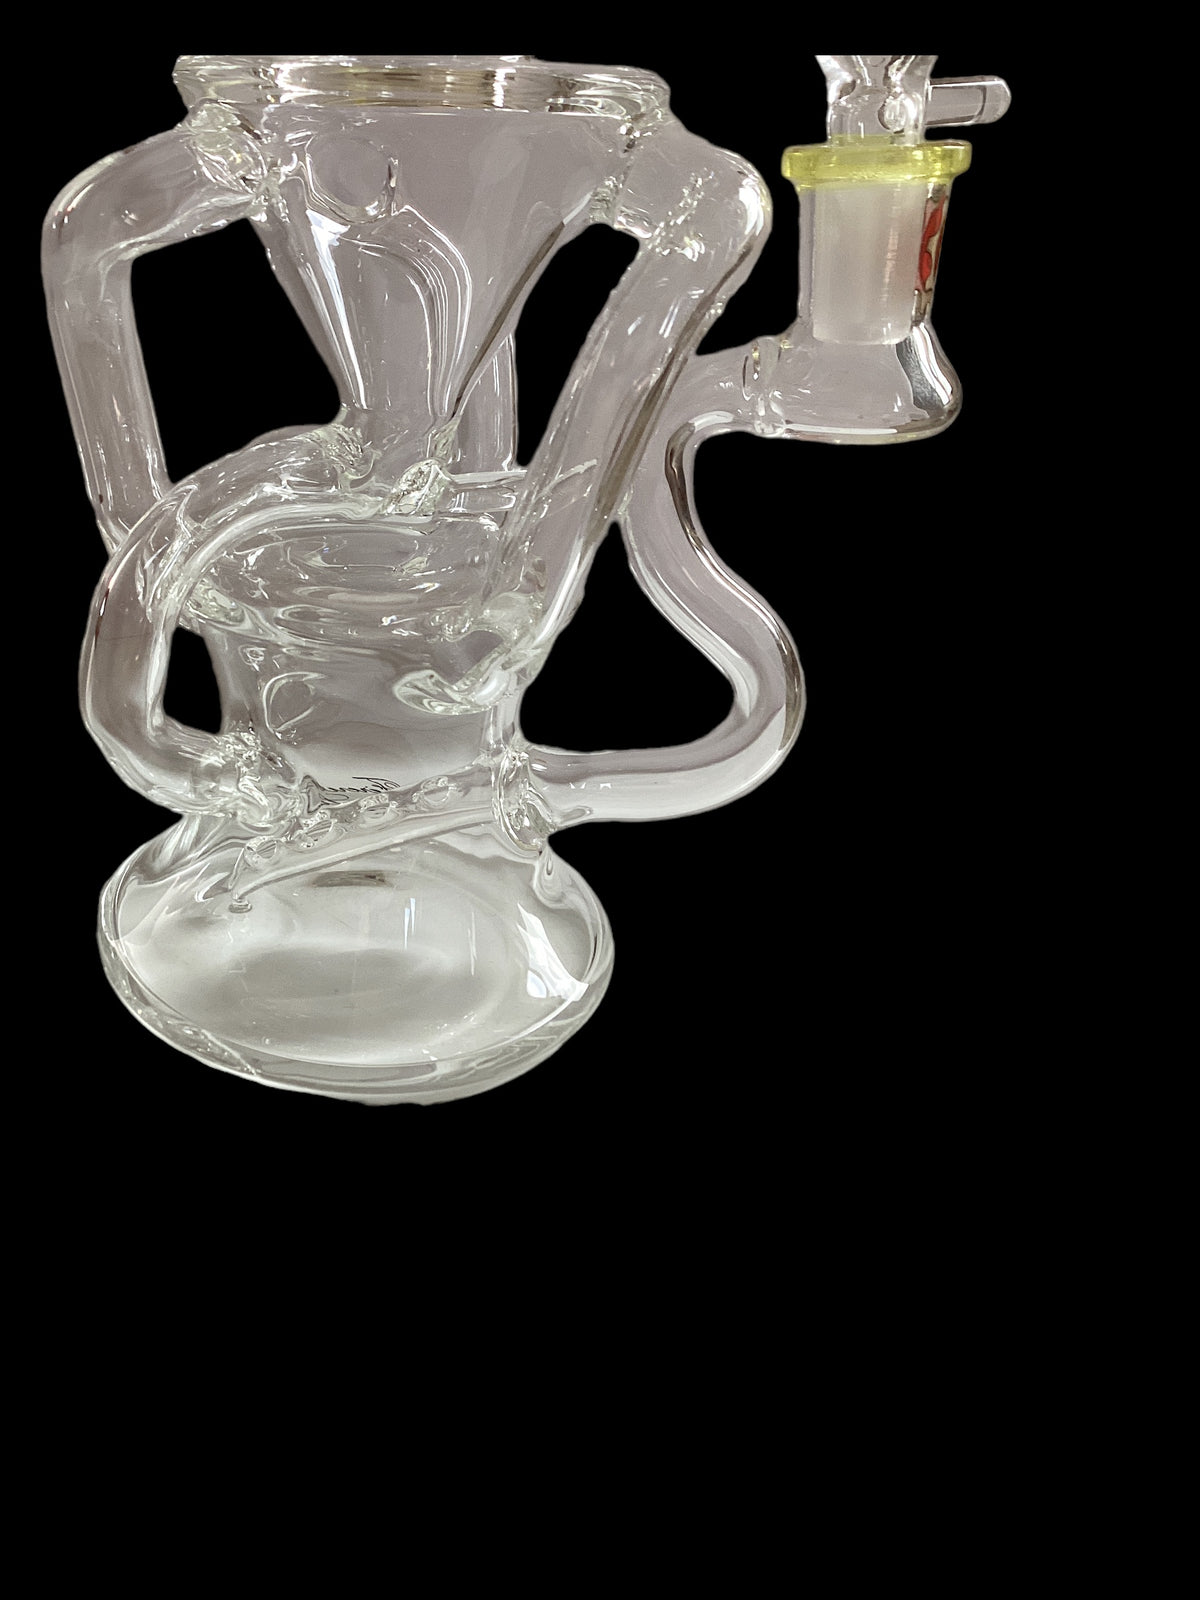 Recycler Dab Rig